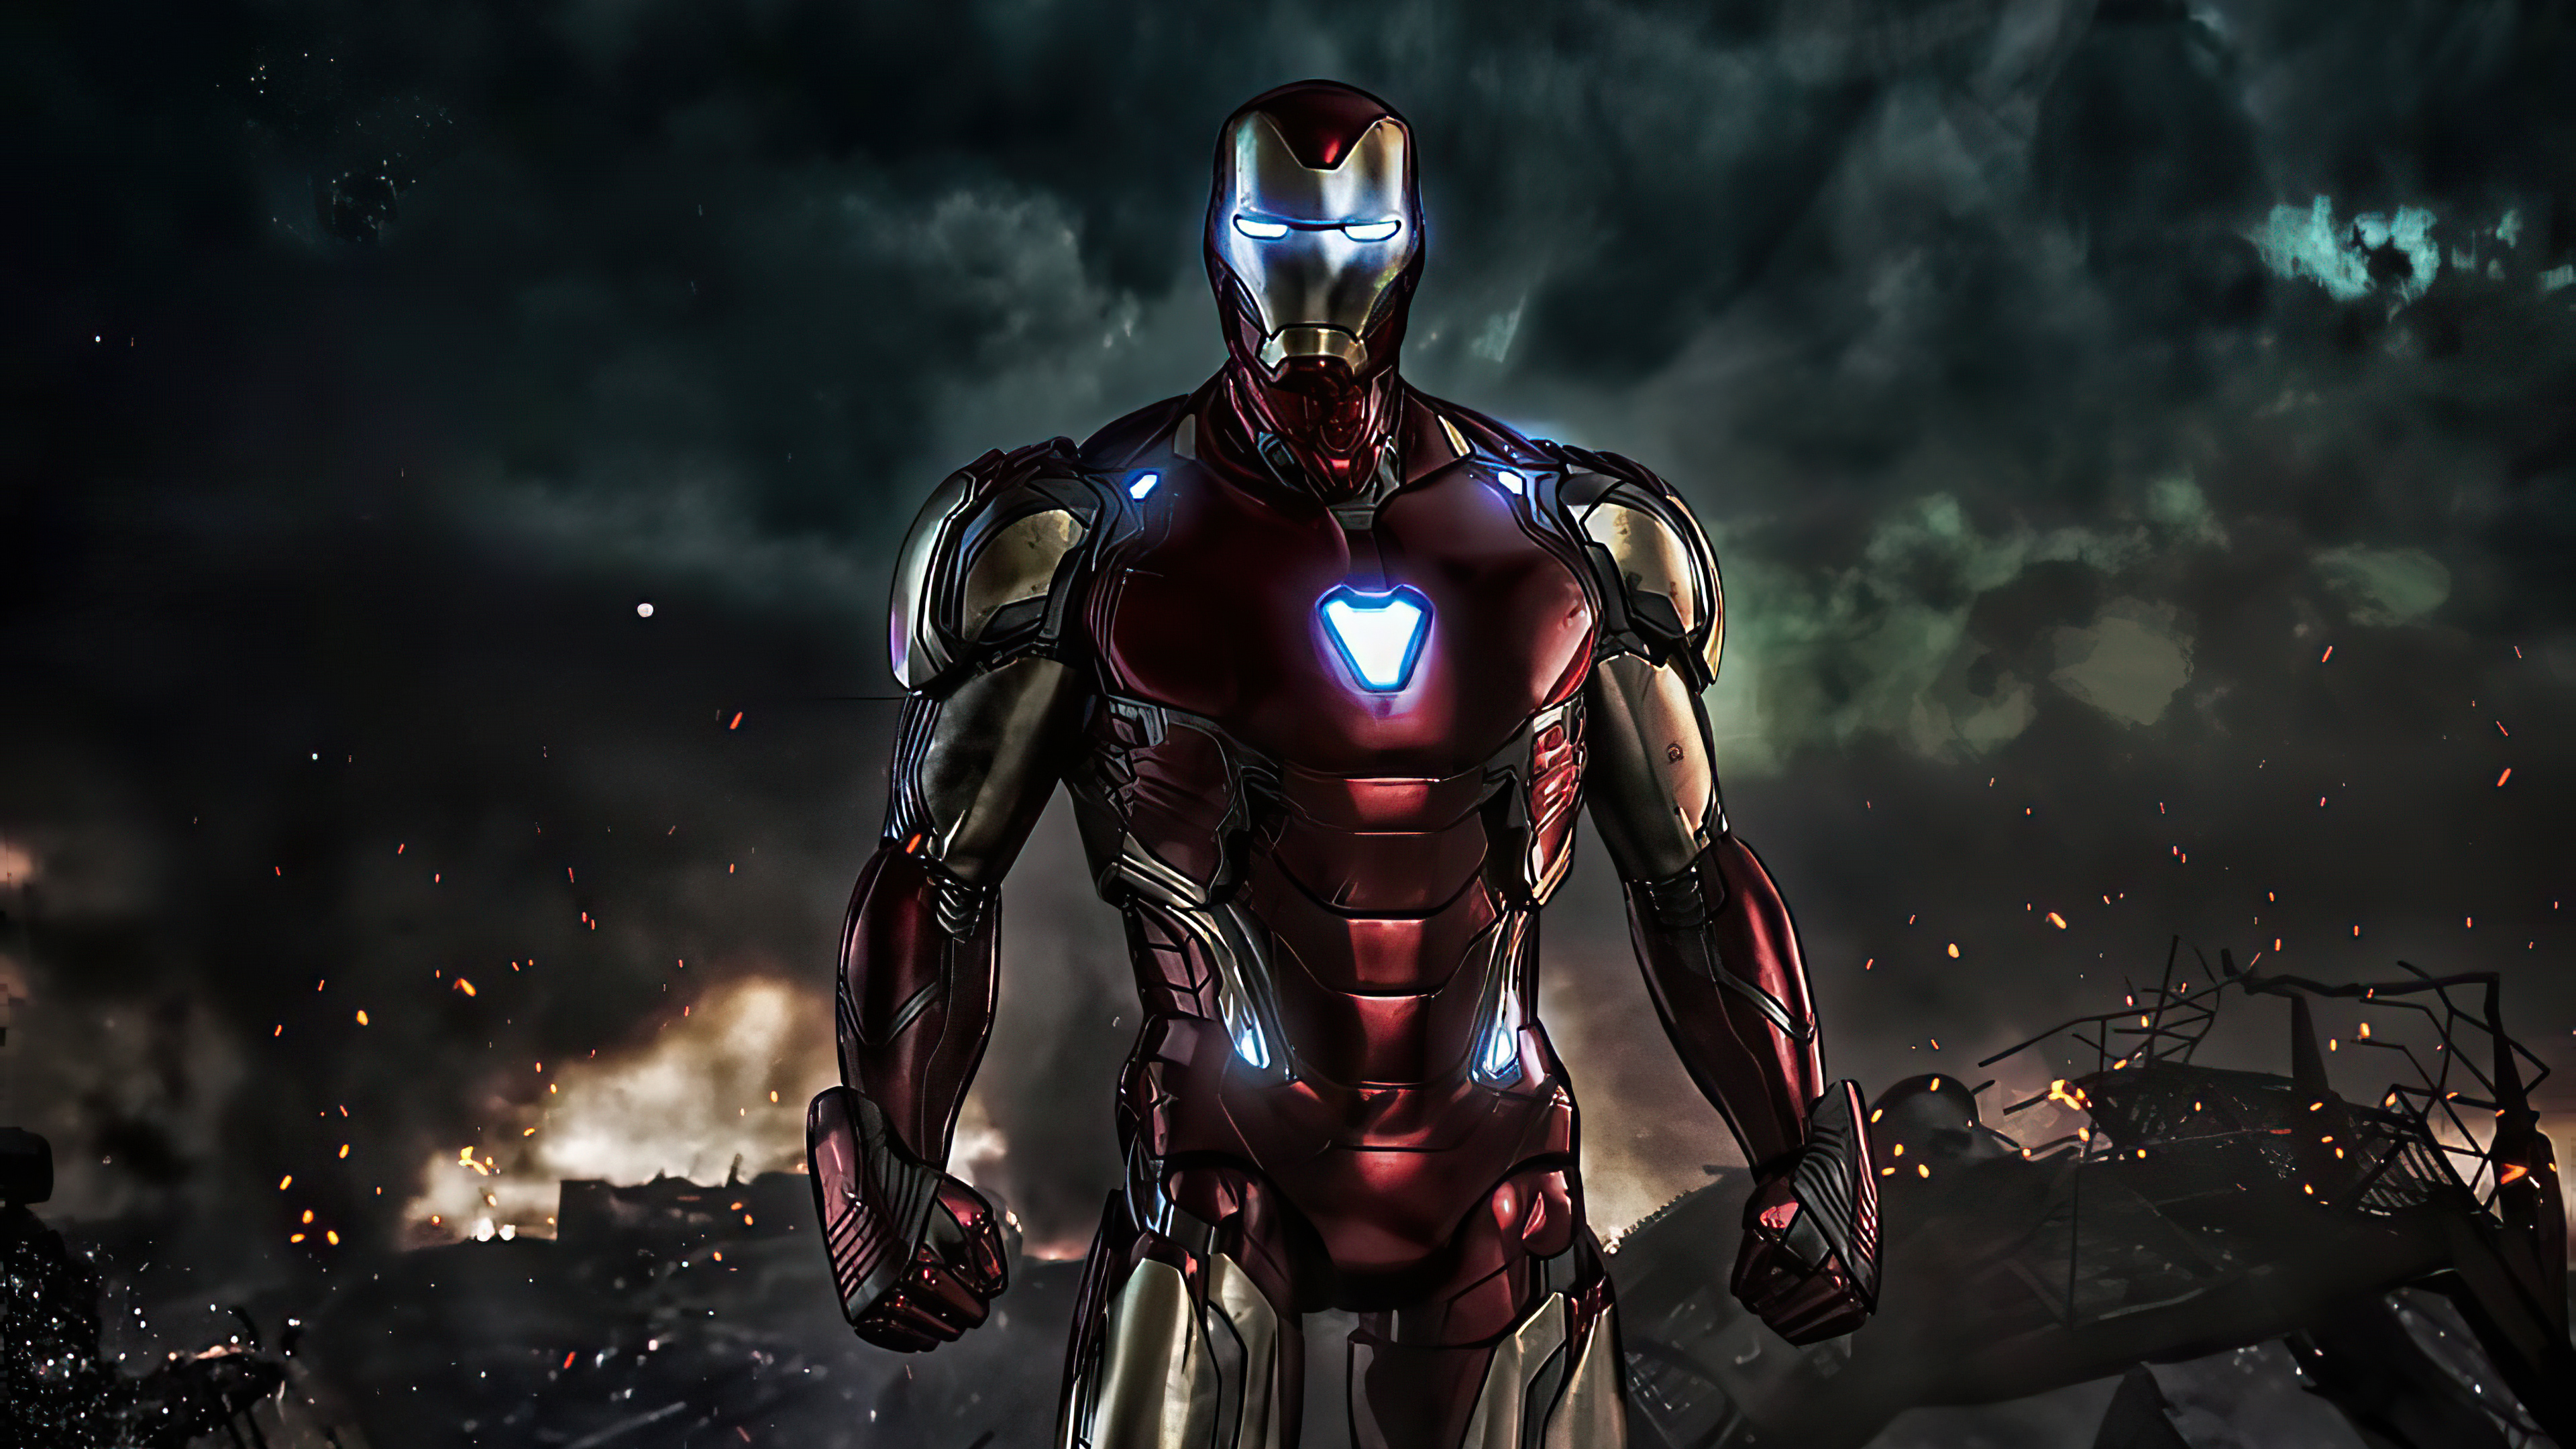 4k Iron Man Endgame 2020 Laptop Full HD 1080P HD 4k Wallpaper, Image, Background, Photo and Picture